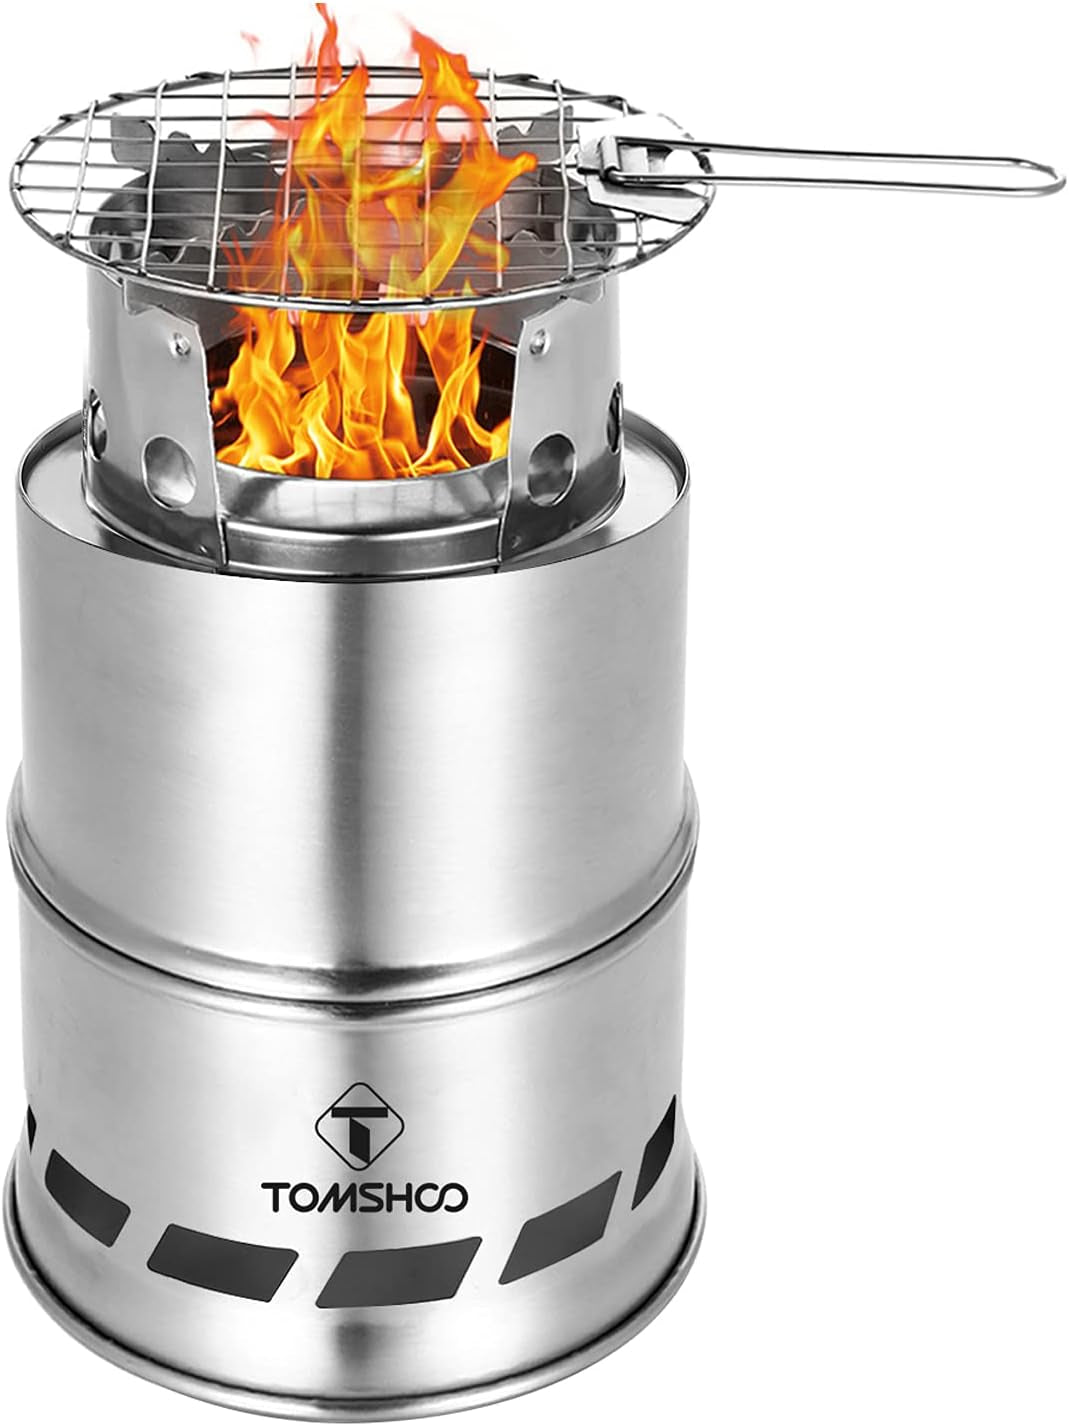 Portable, Foldable, Stainless Steel, Burning Backpacking Stove